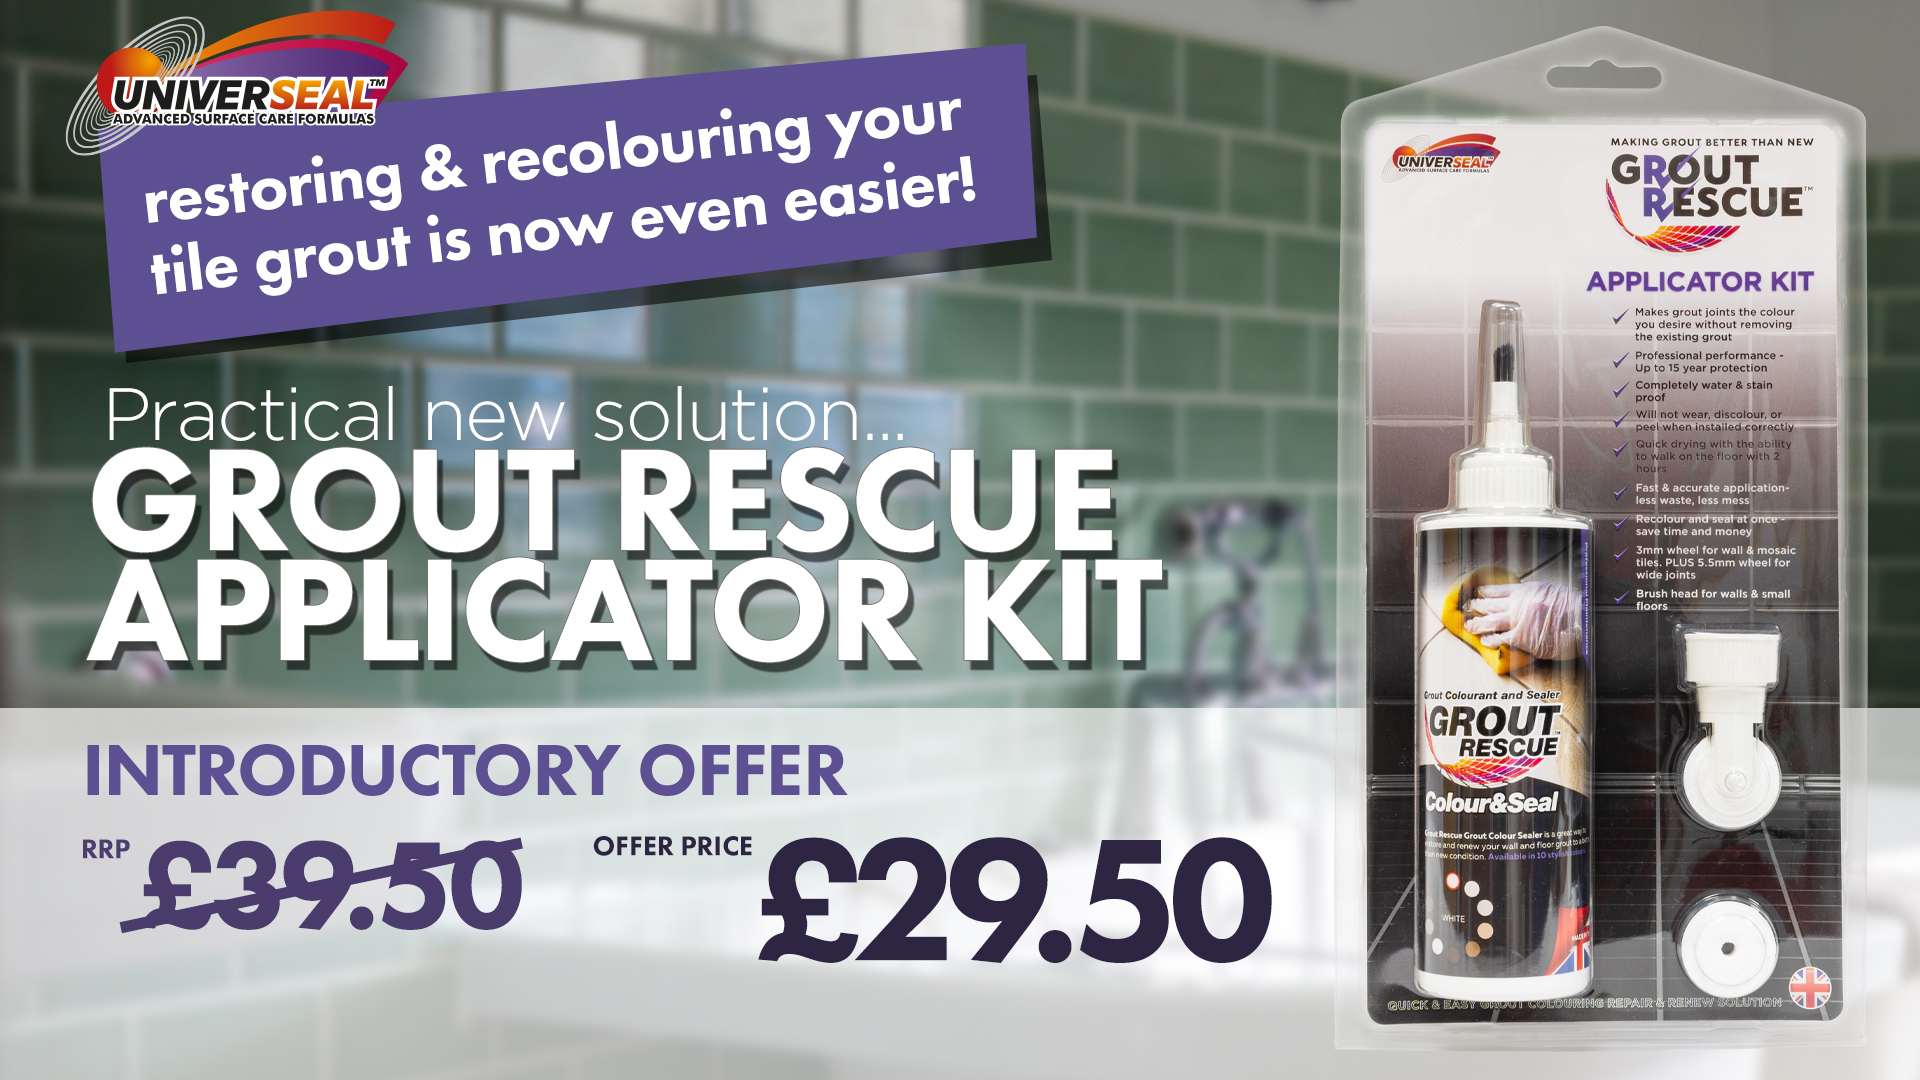 Universeal Grout Rescue Applicator Kit Introductory Offer